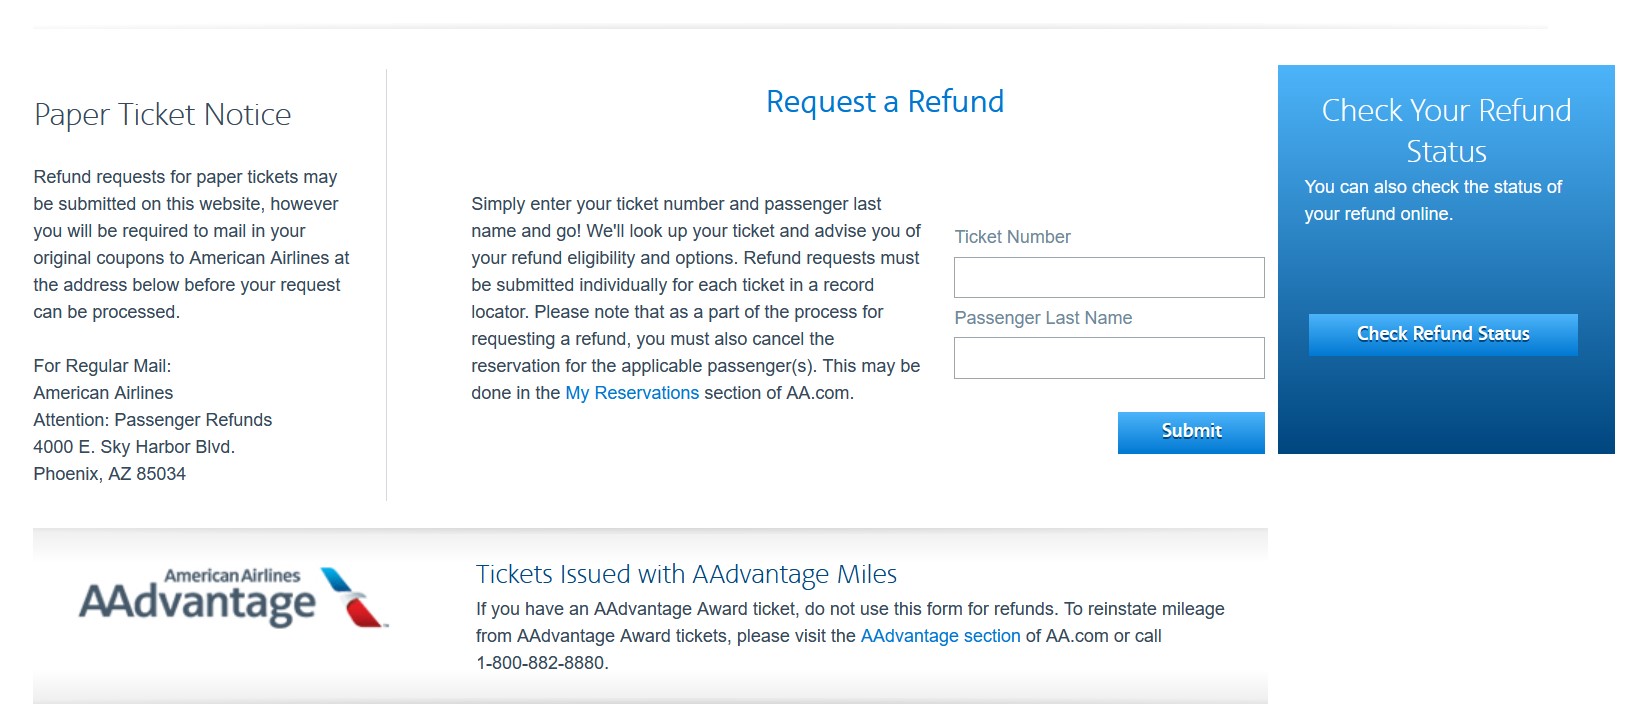 american-airlines-refund-policy-how-to-get-a-refund-on-aa